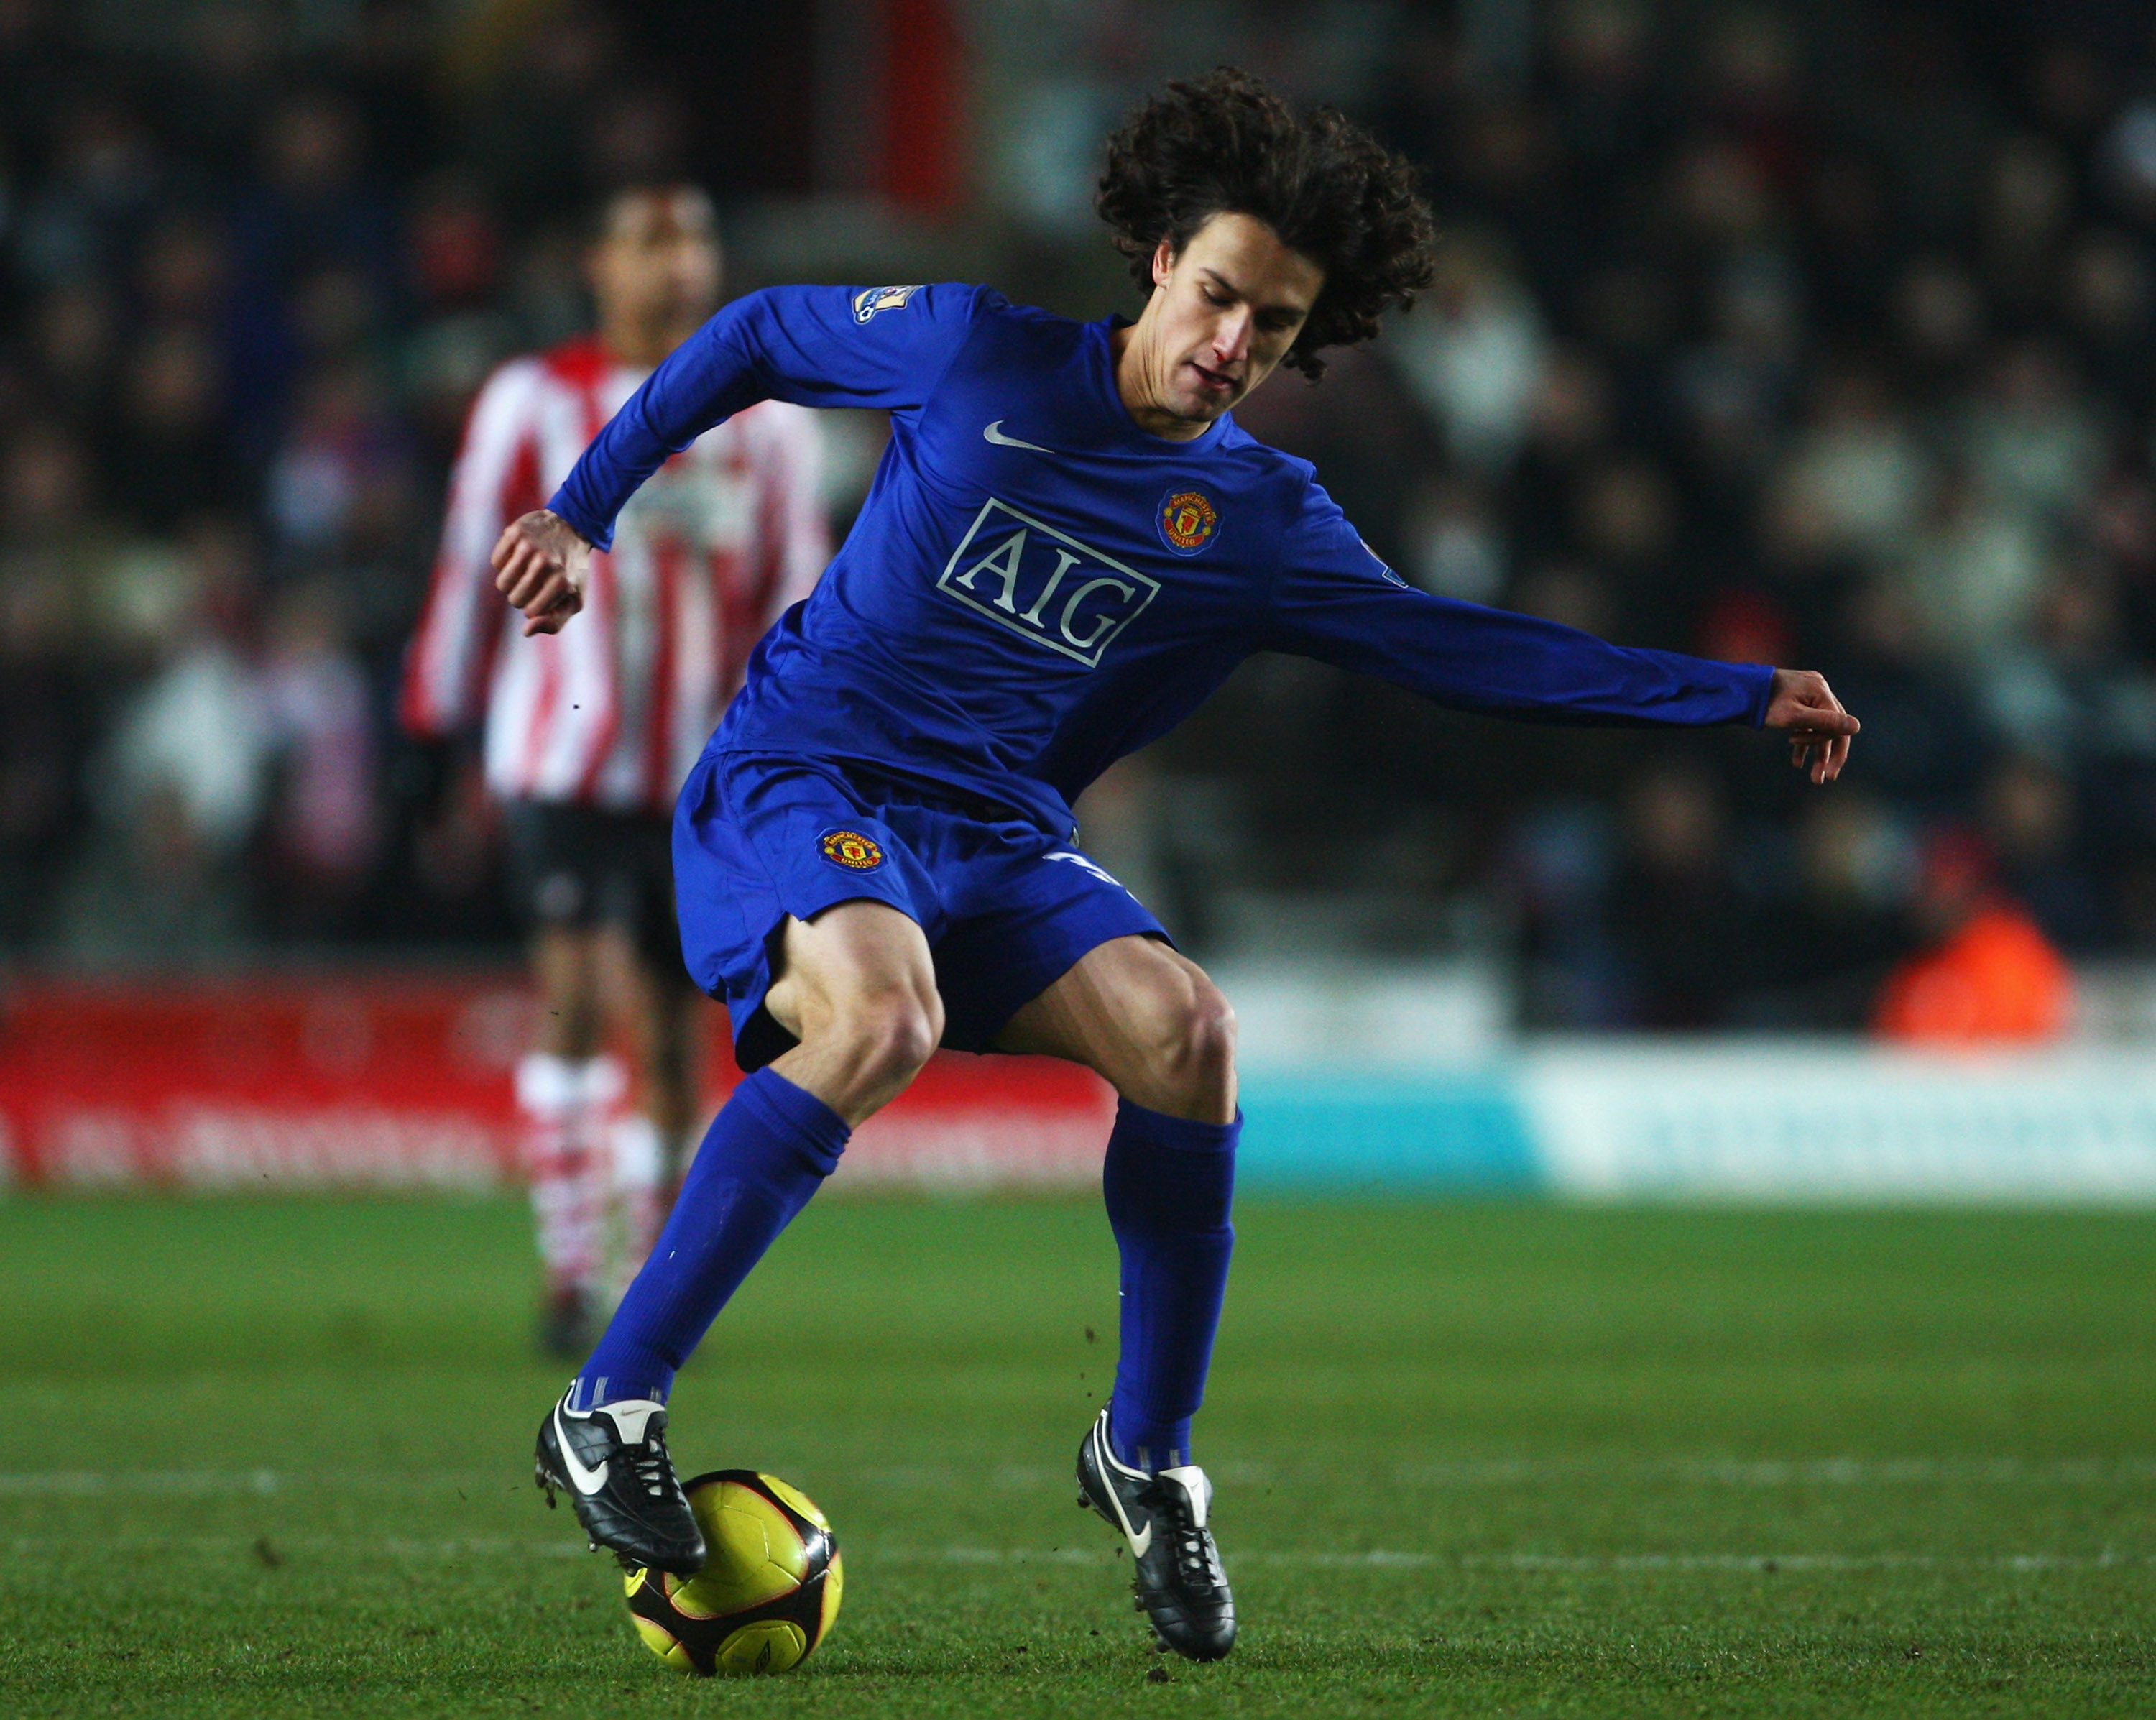 SOUTHAMPTON, UNITED KINGDOM - JANUARY 04:  Rodrigo Possebon of Manchester United in action during the FA Cup Sponsored by E.on 3rd Round  match between Southampton and Manchester United at St Mary's Stadium on January 4, 2009 in Southampton, England.  (Ph